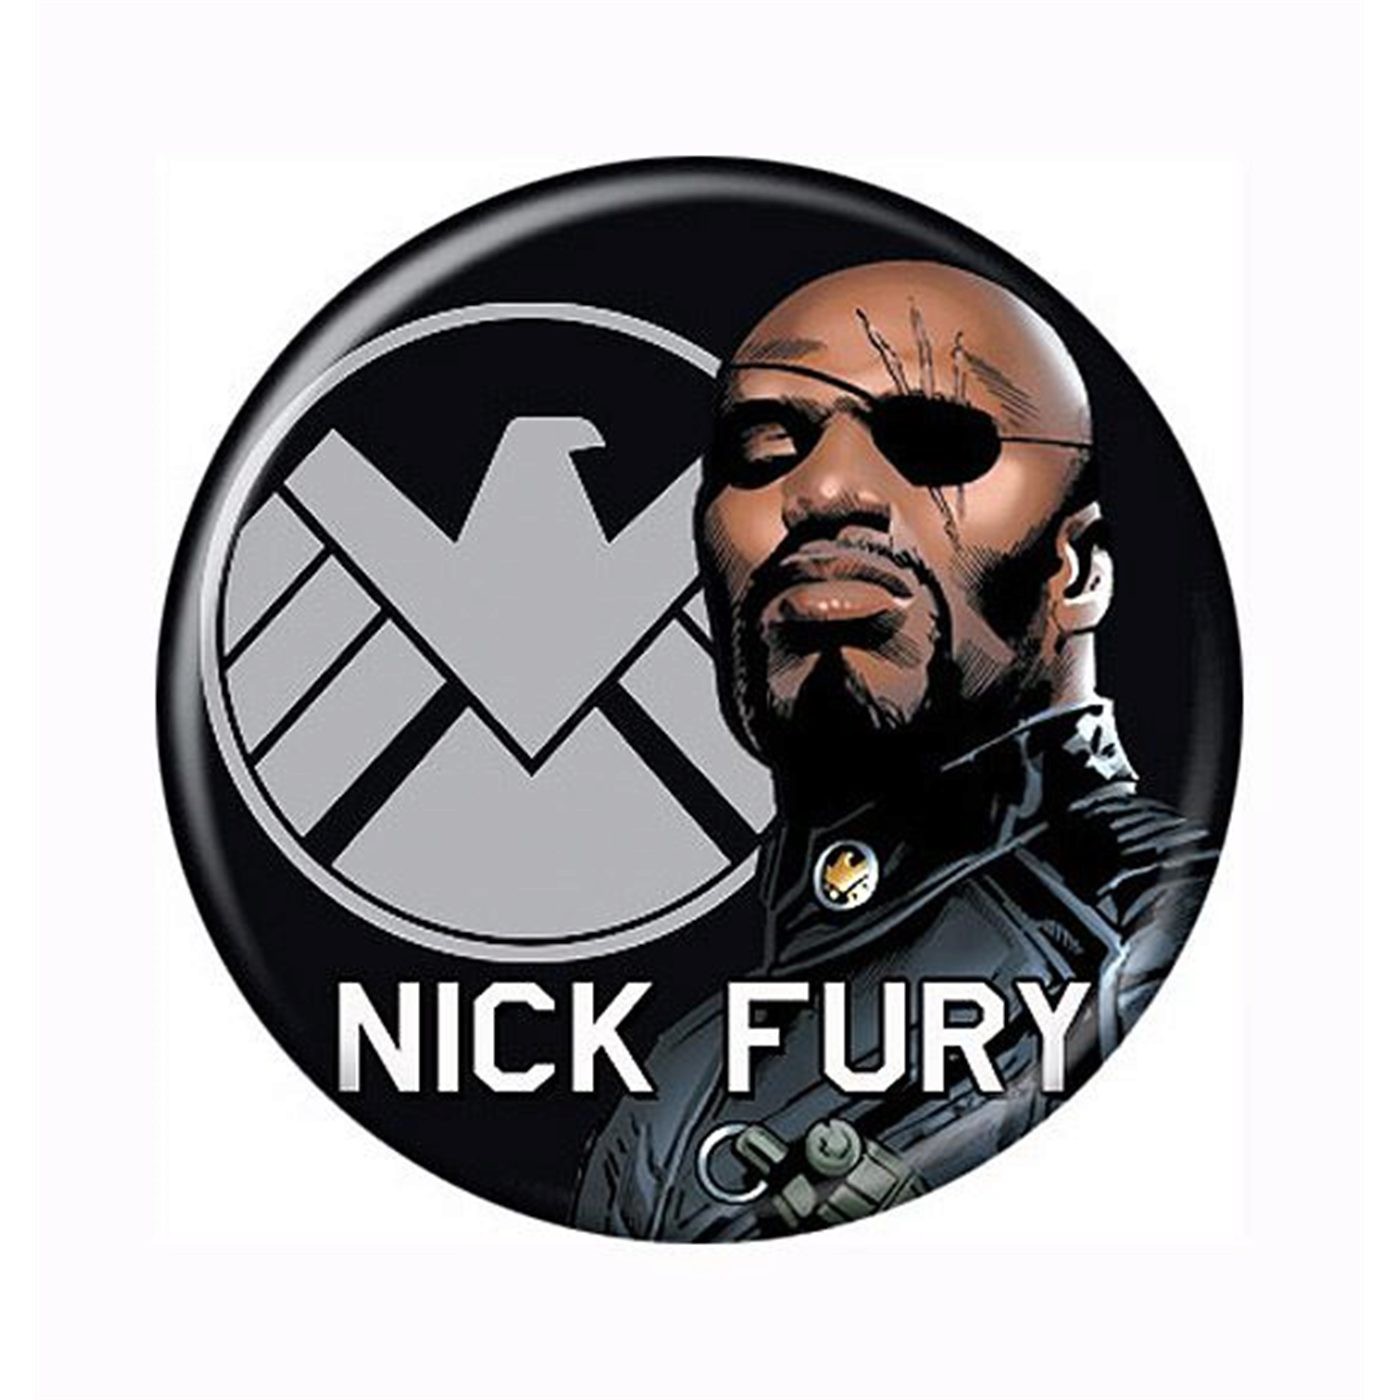 Director Nick Fury of S.H.I.E.L.D. Button